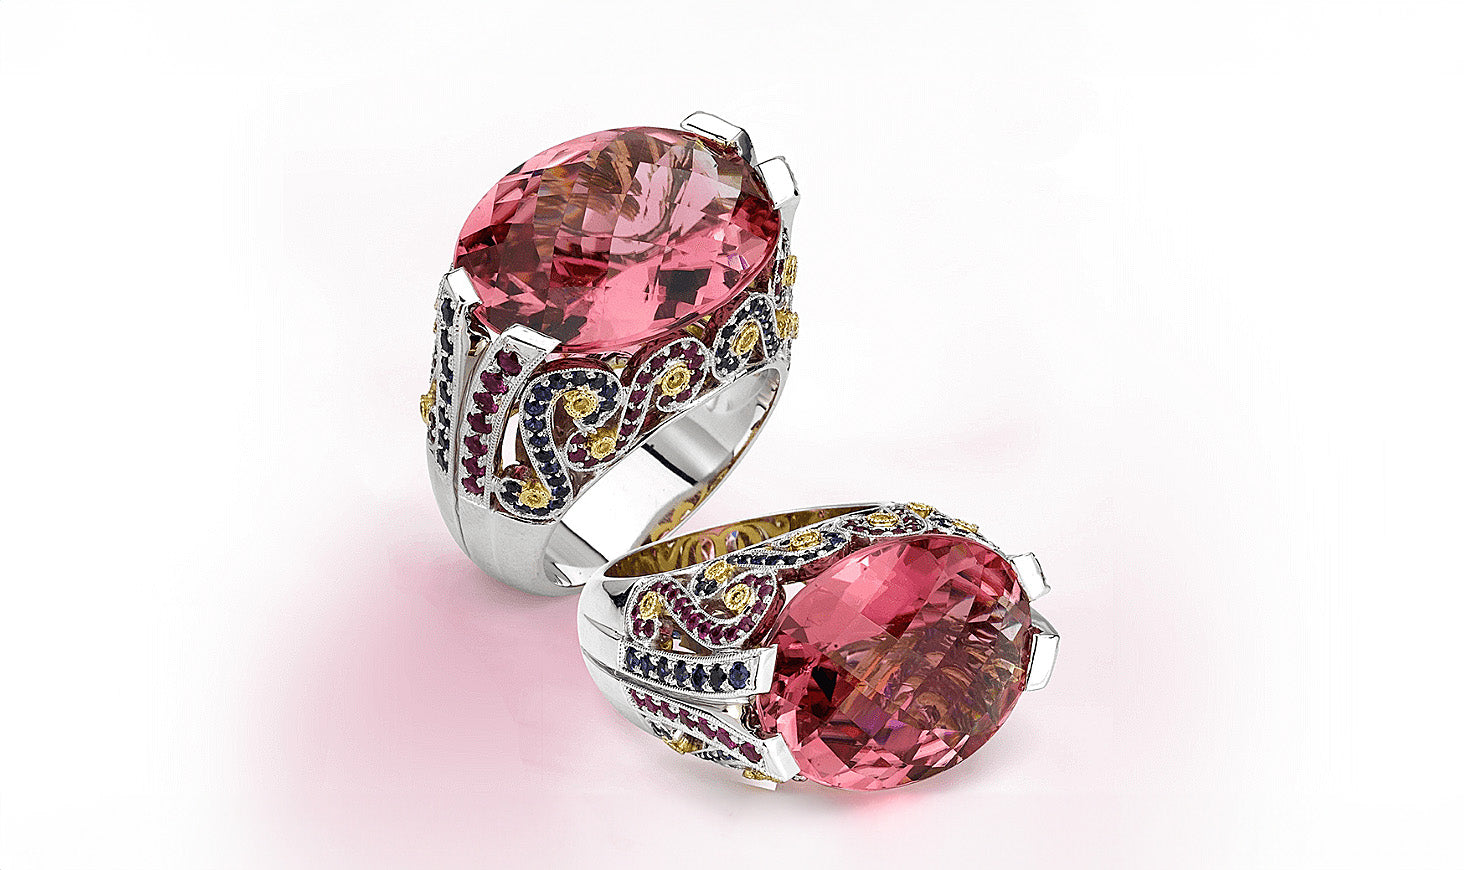 A pair of rings with a large pink stone on a white background. The rings are custom-designed by Garo Demirjian and made with colorful stones.